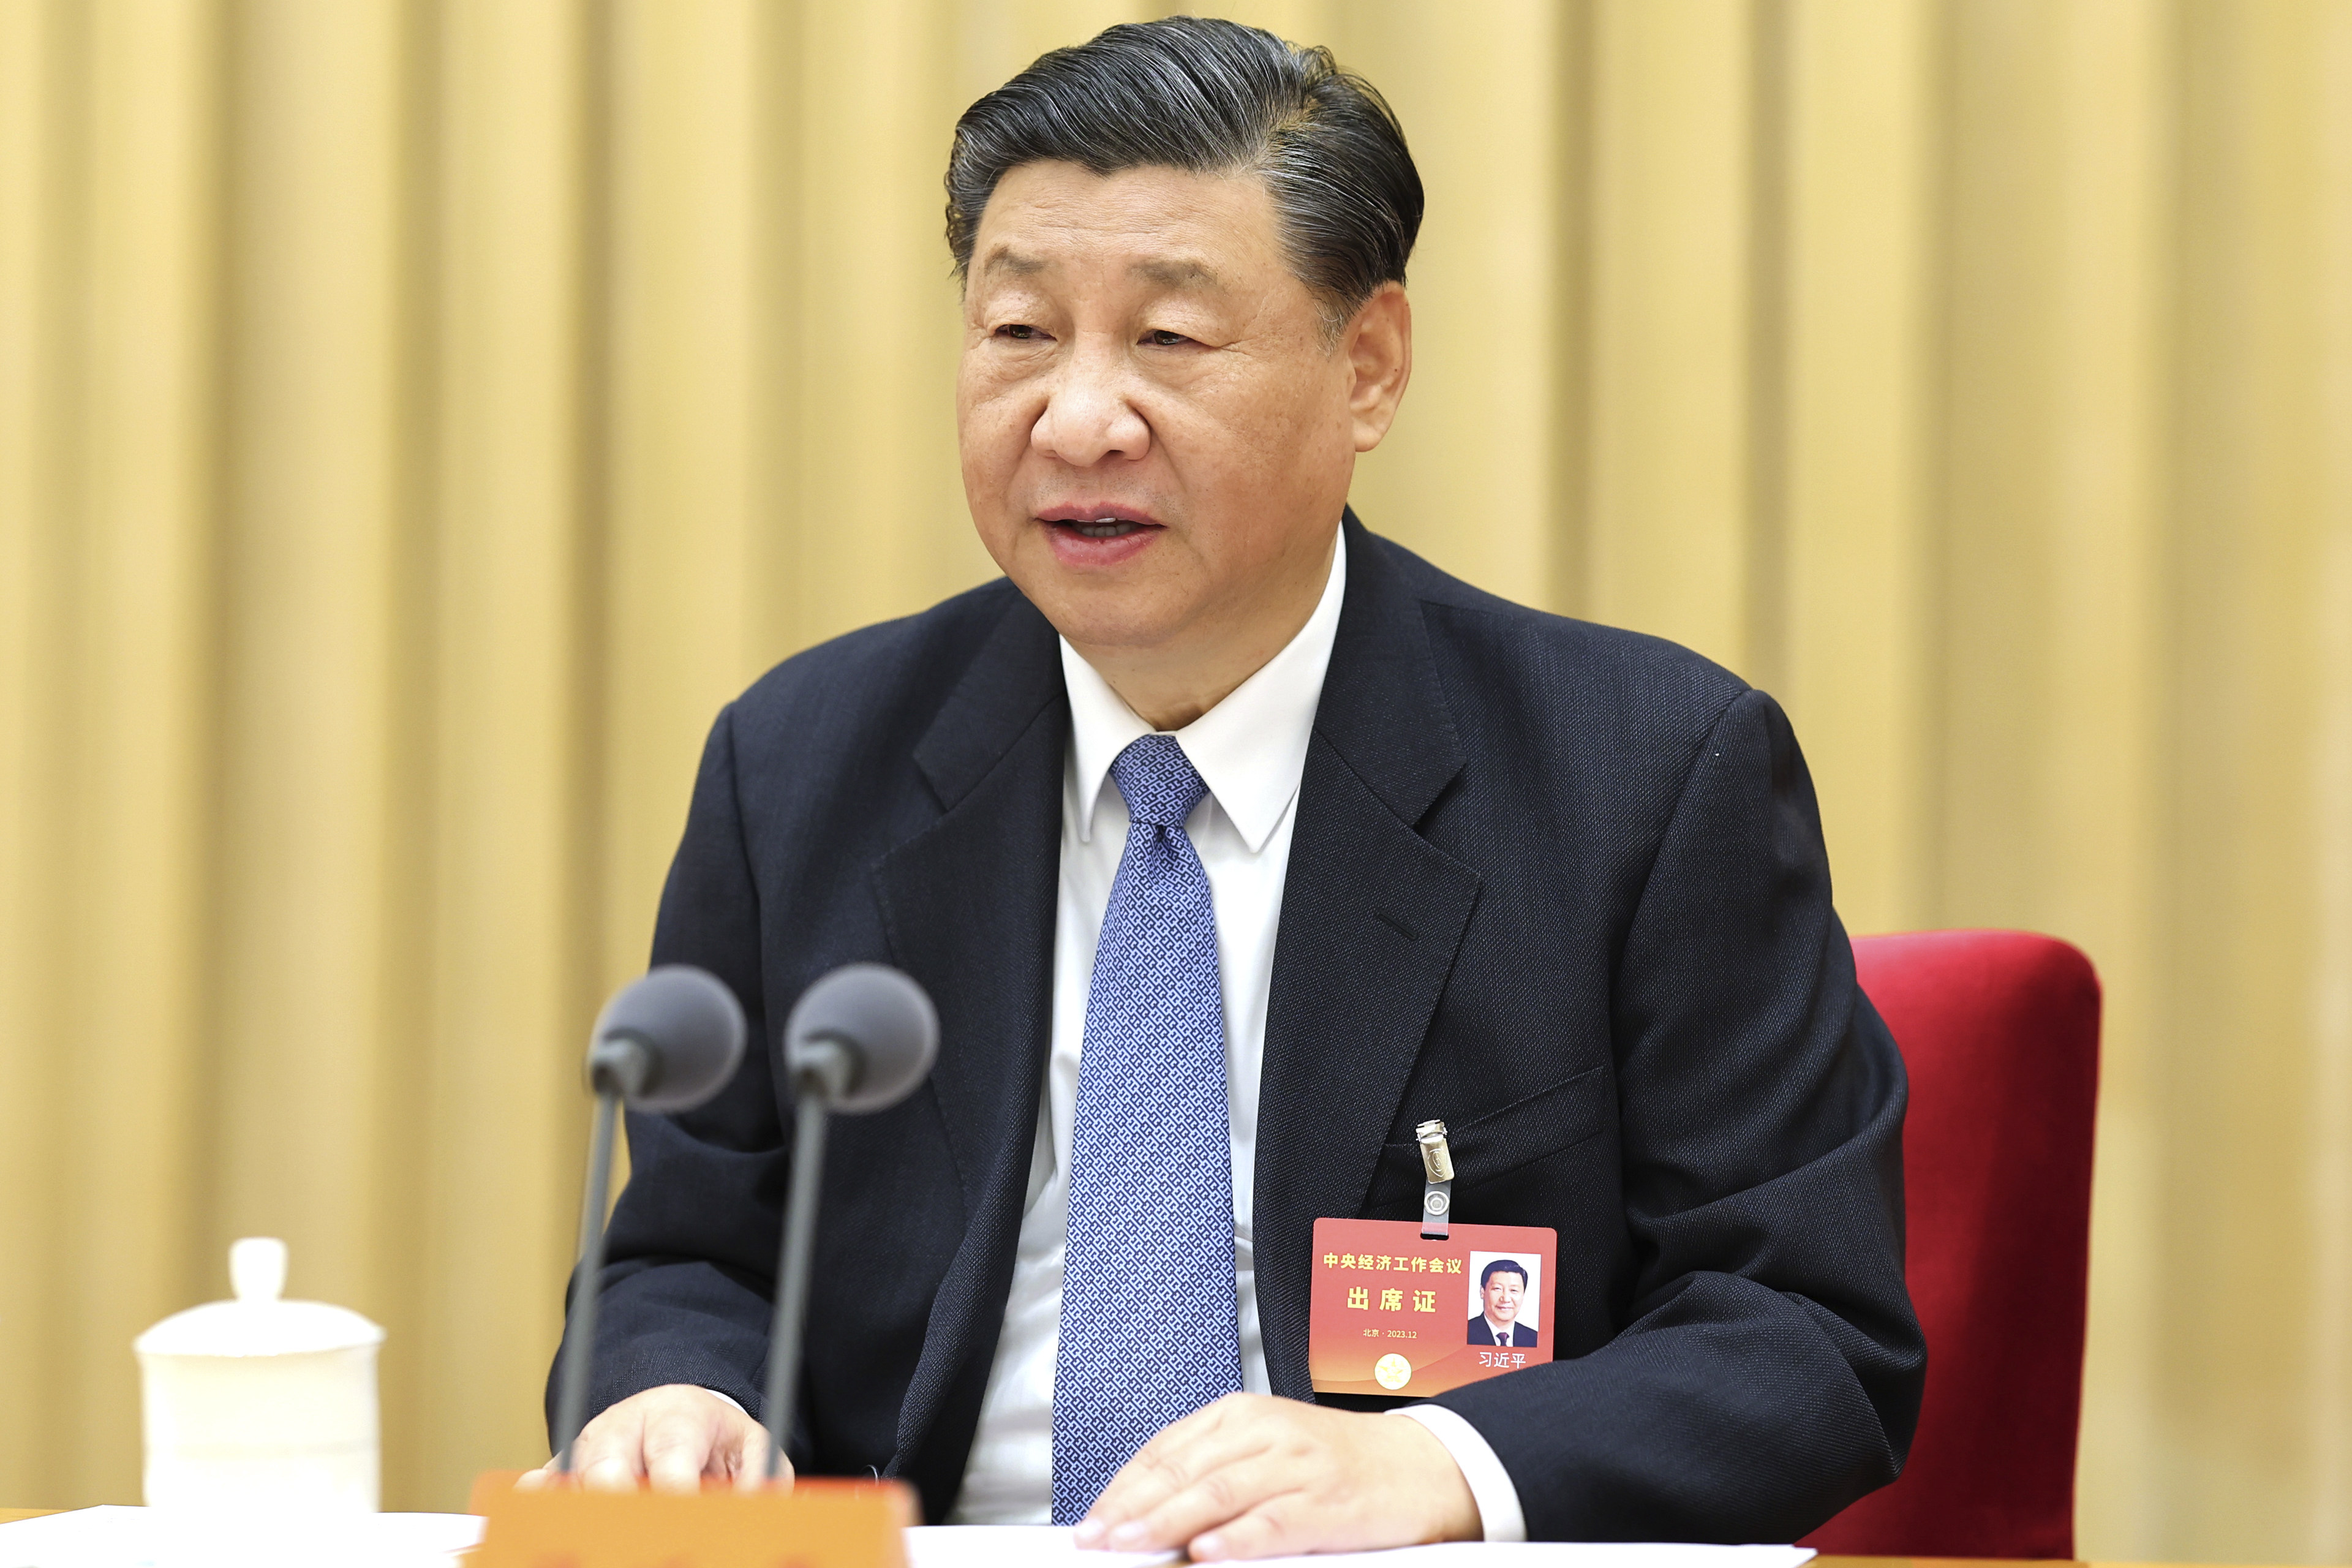 President Xi Jinping called for “courage” in policy implementation at the annual central economic work conference. Photo: Xinhua